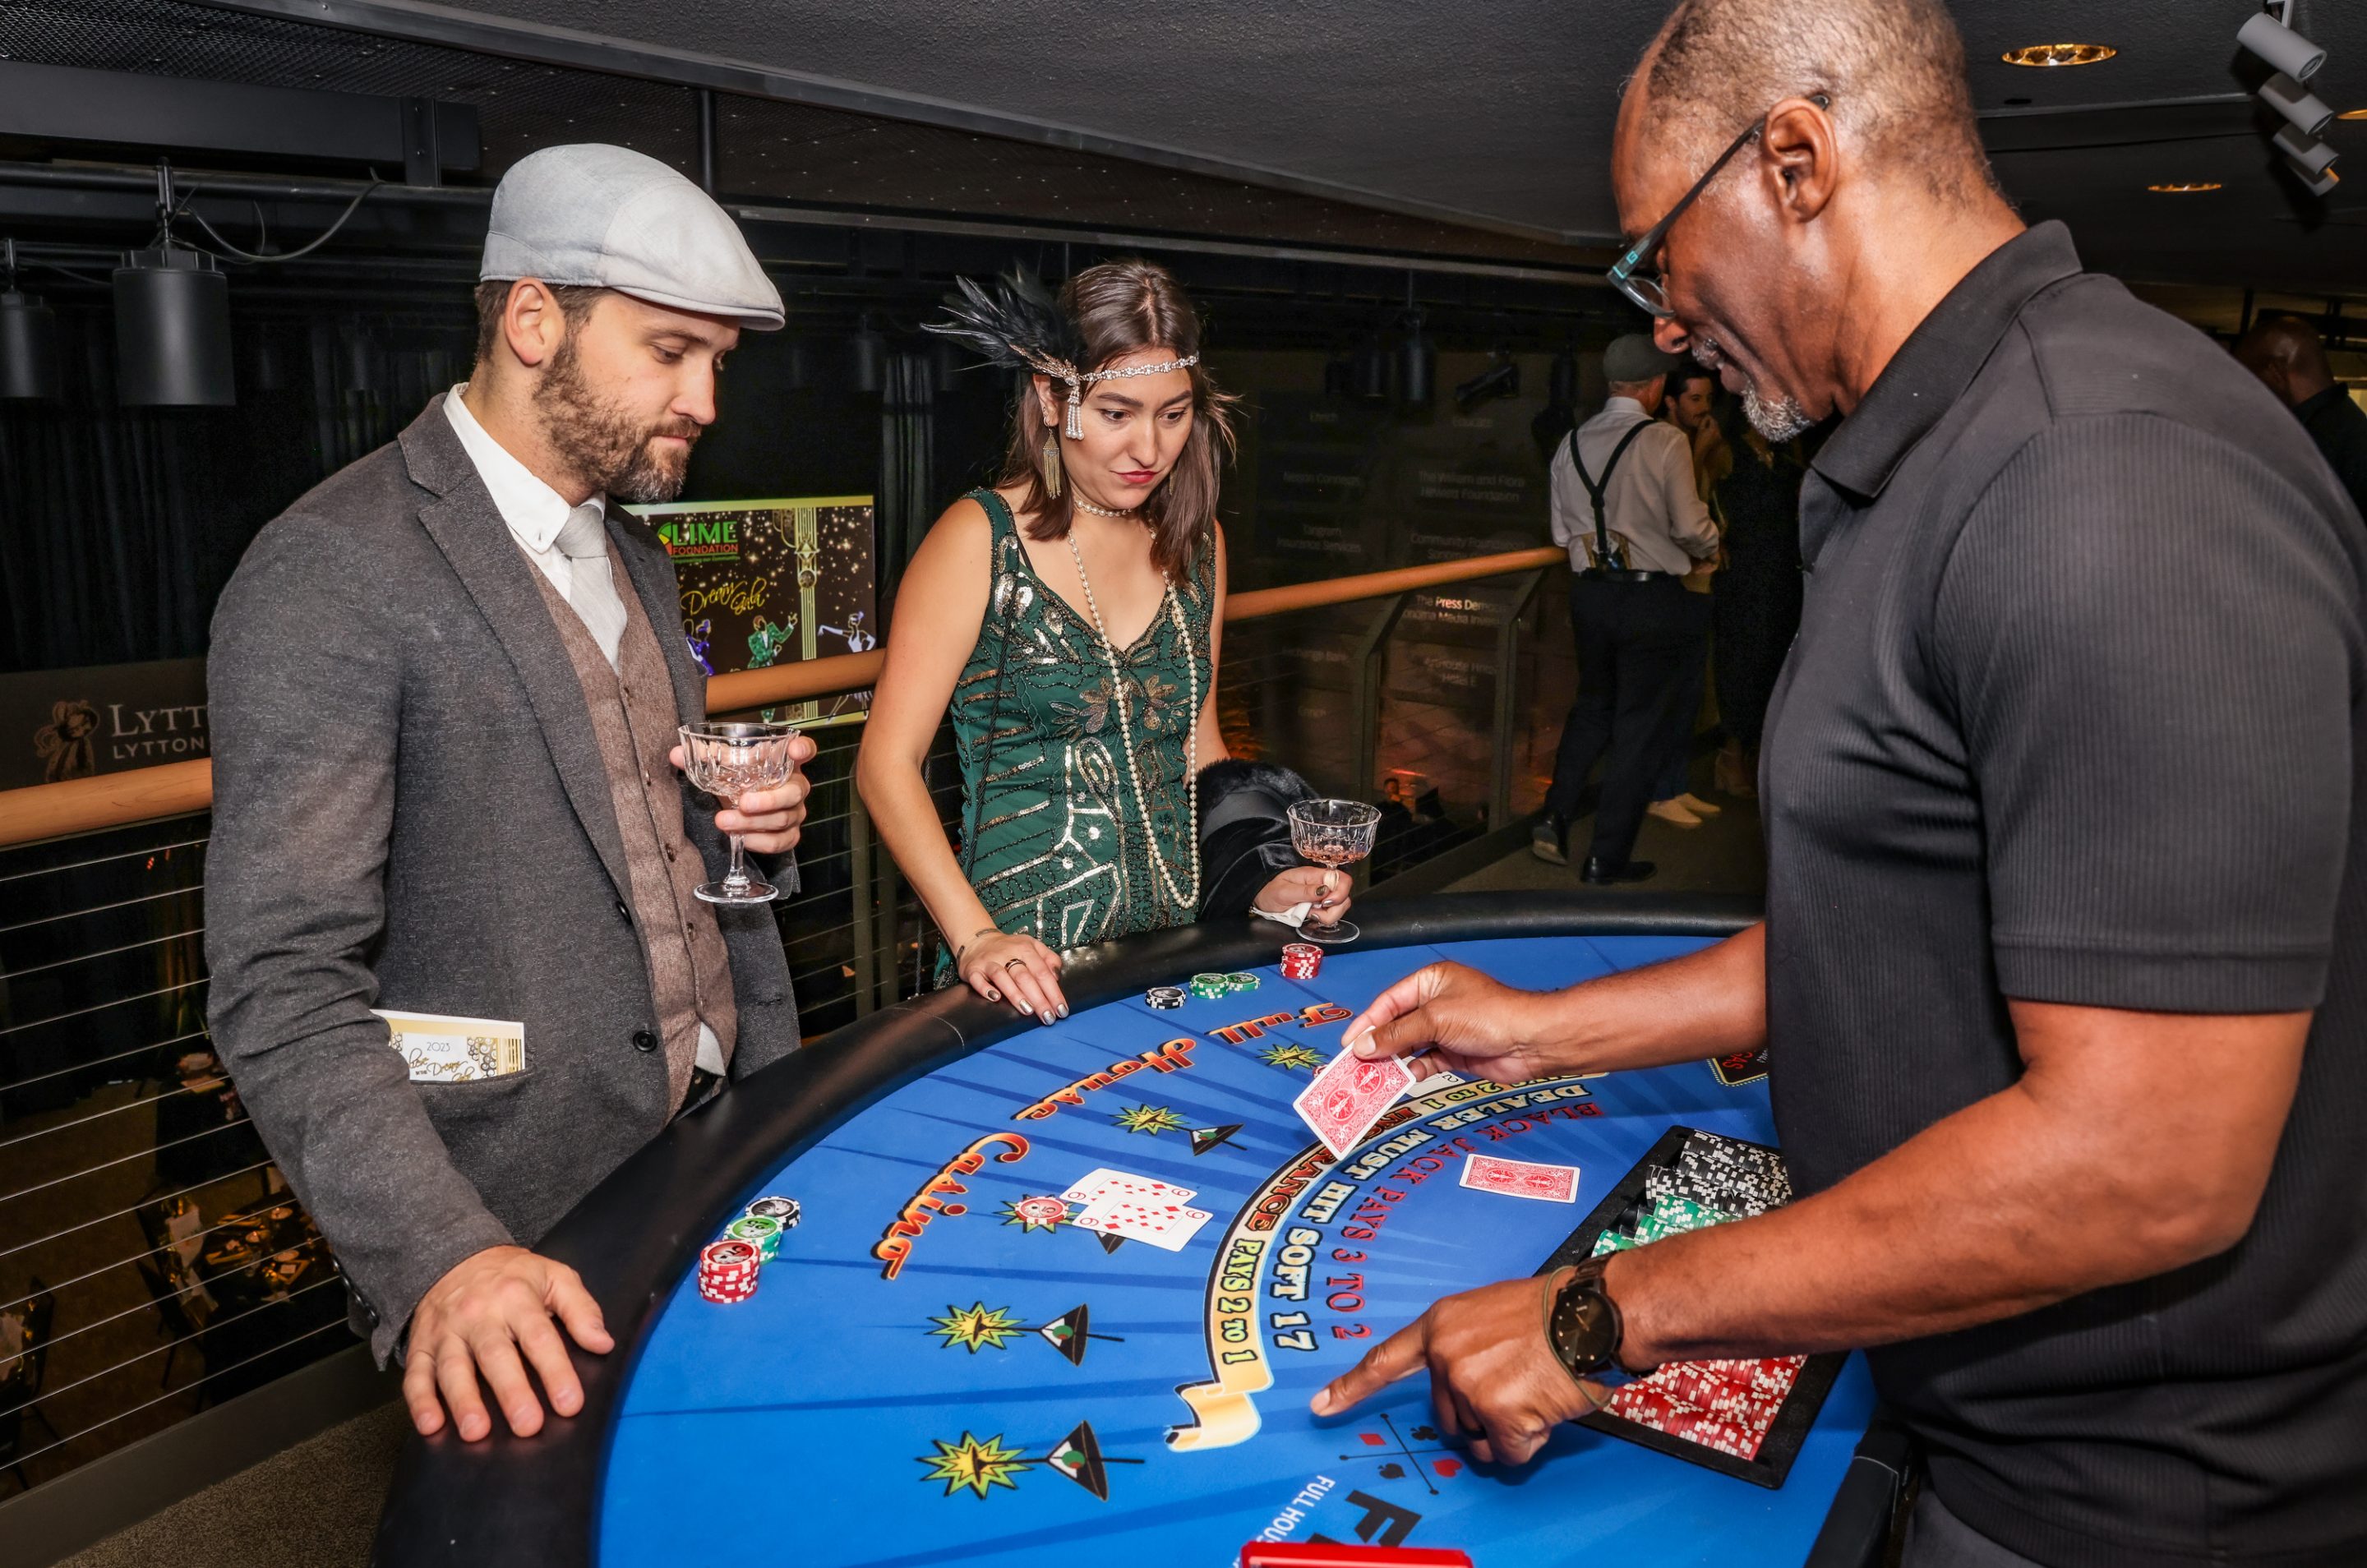 A group of people enjoying a game of roulette at a Santa Rosa non-profit event organized by The LIME Foundation.